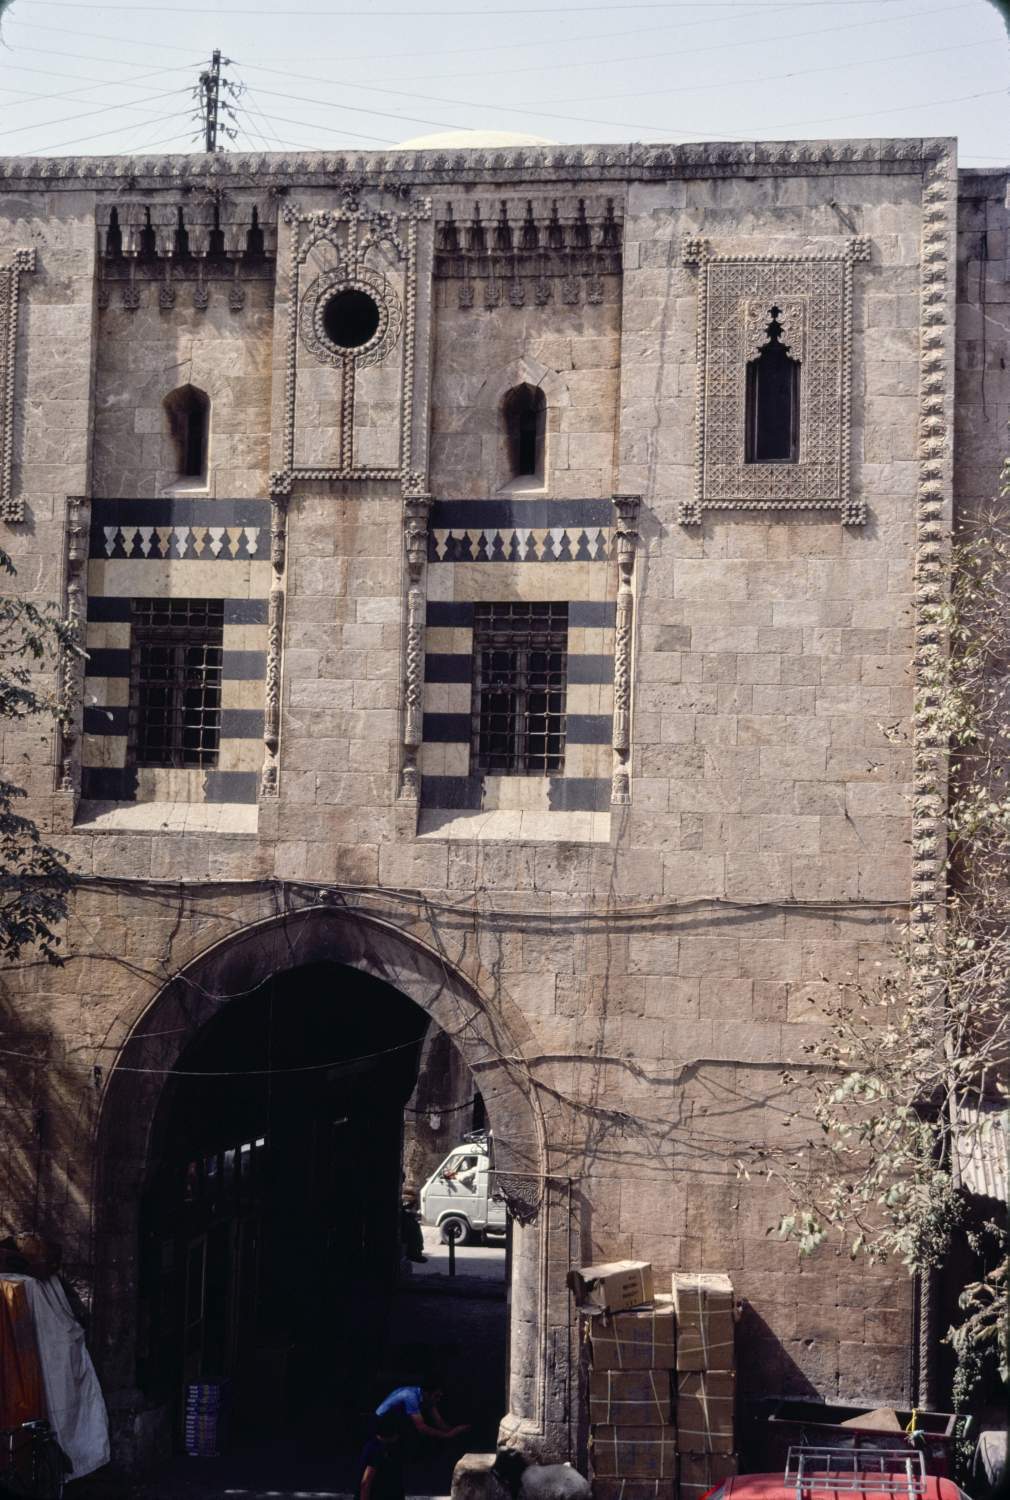 Entry portal, close view from inside courtyard.